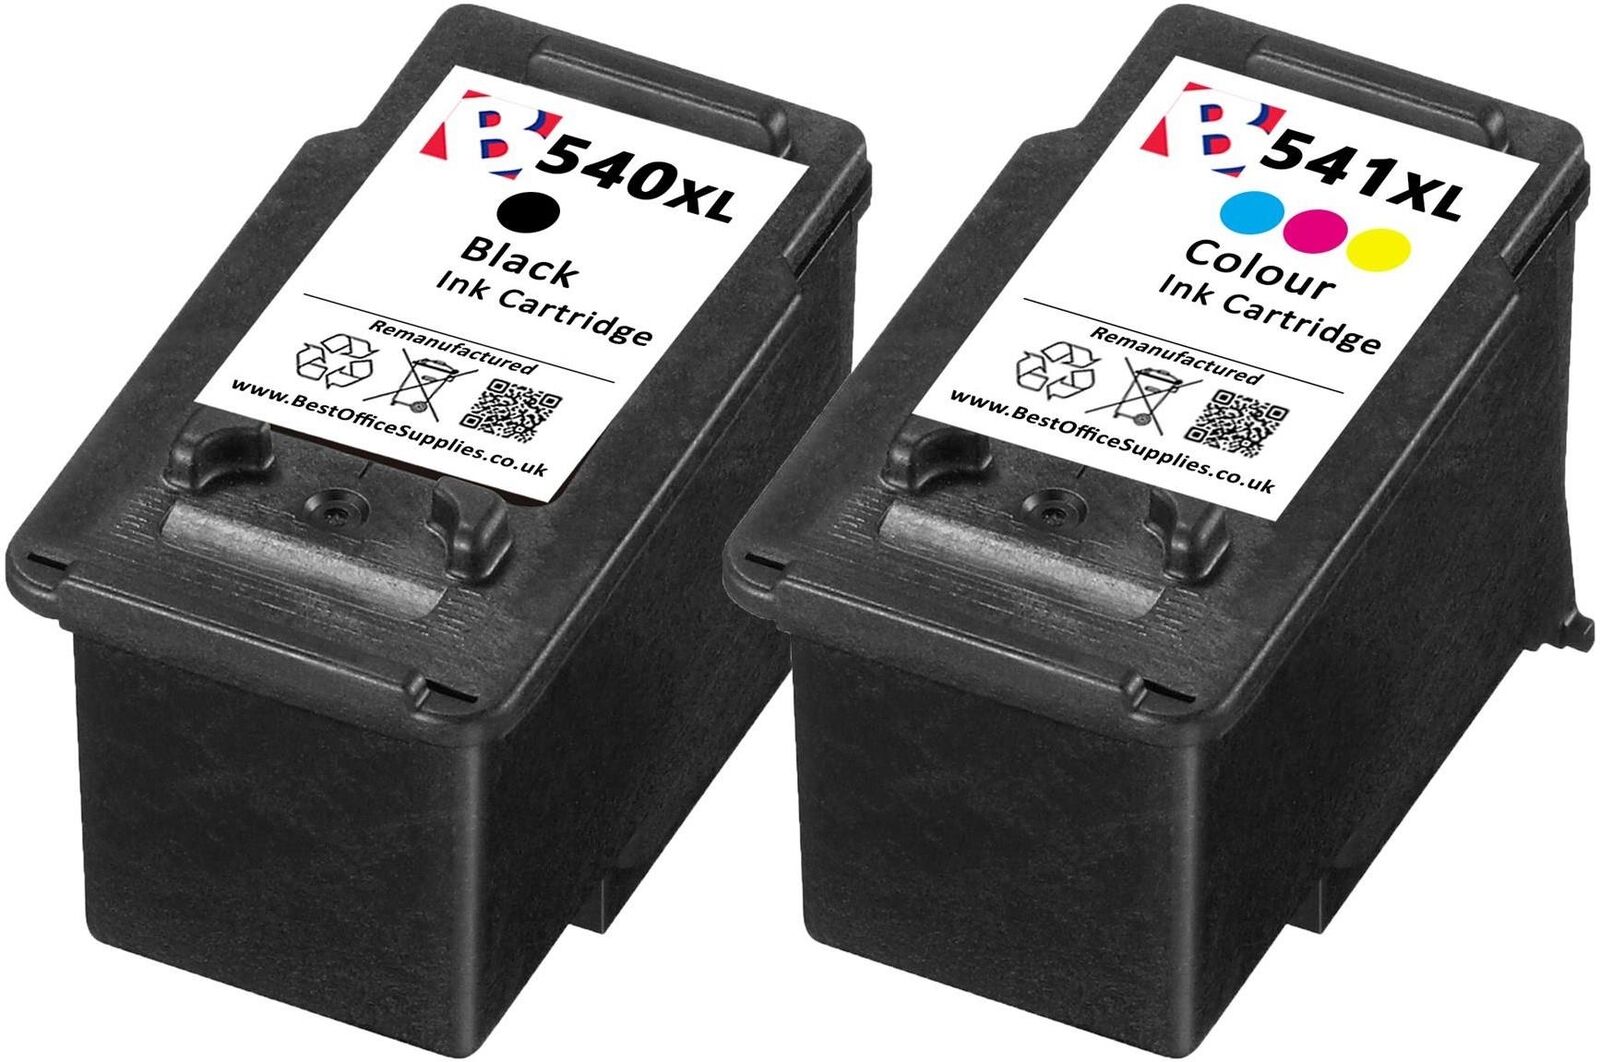 Refilled Canon PG-540XL CL-541XL Ink Cartridges - For Canon Pixma MX394